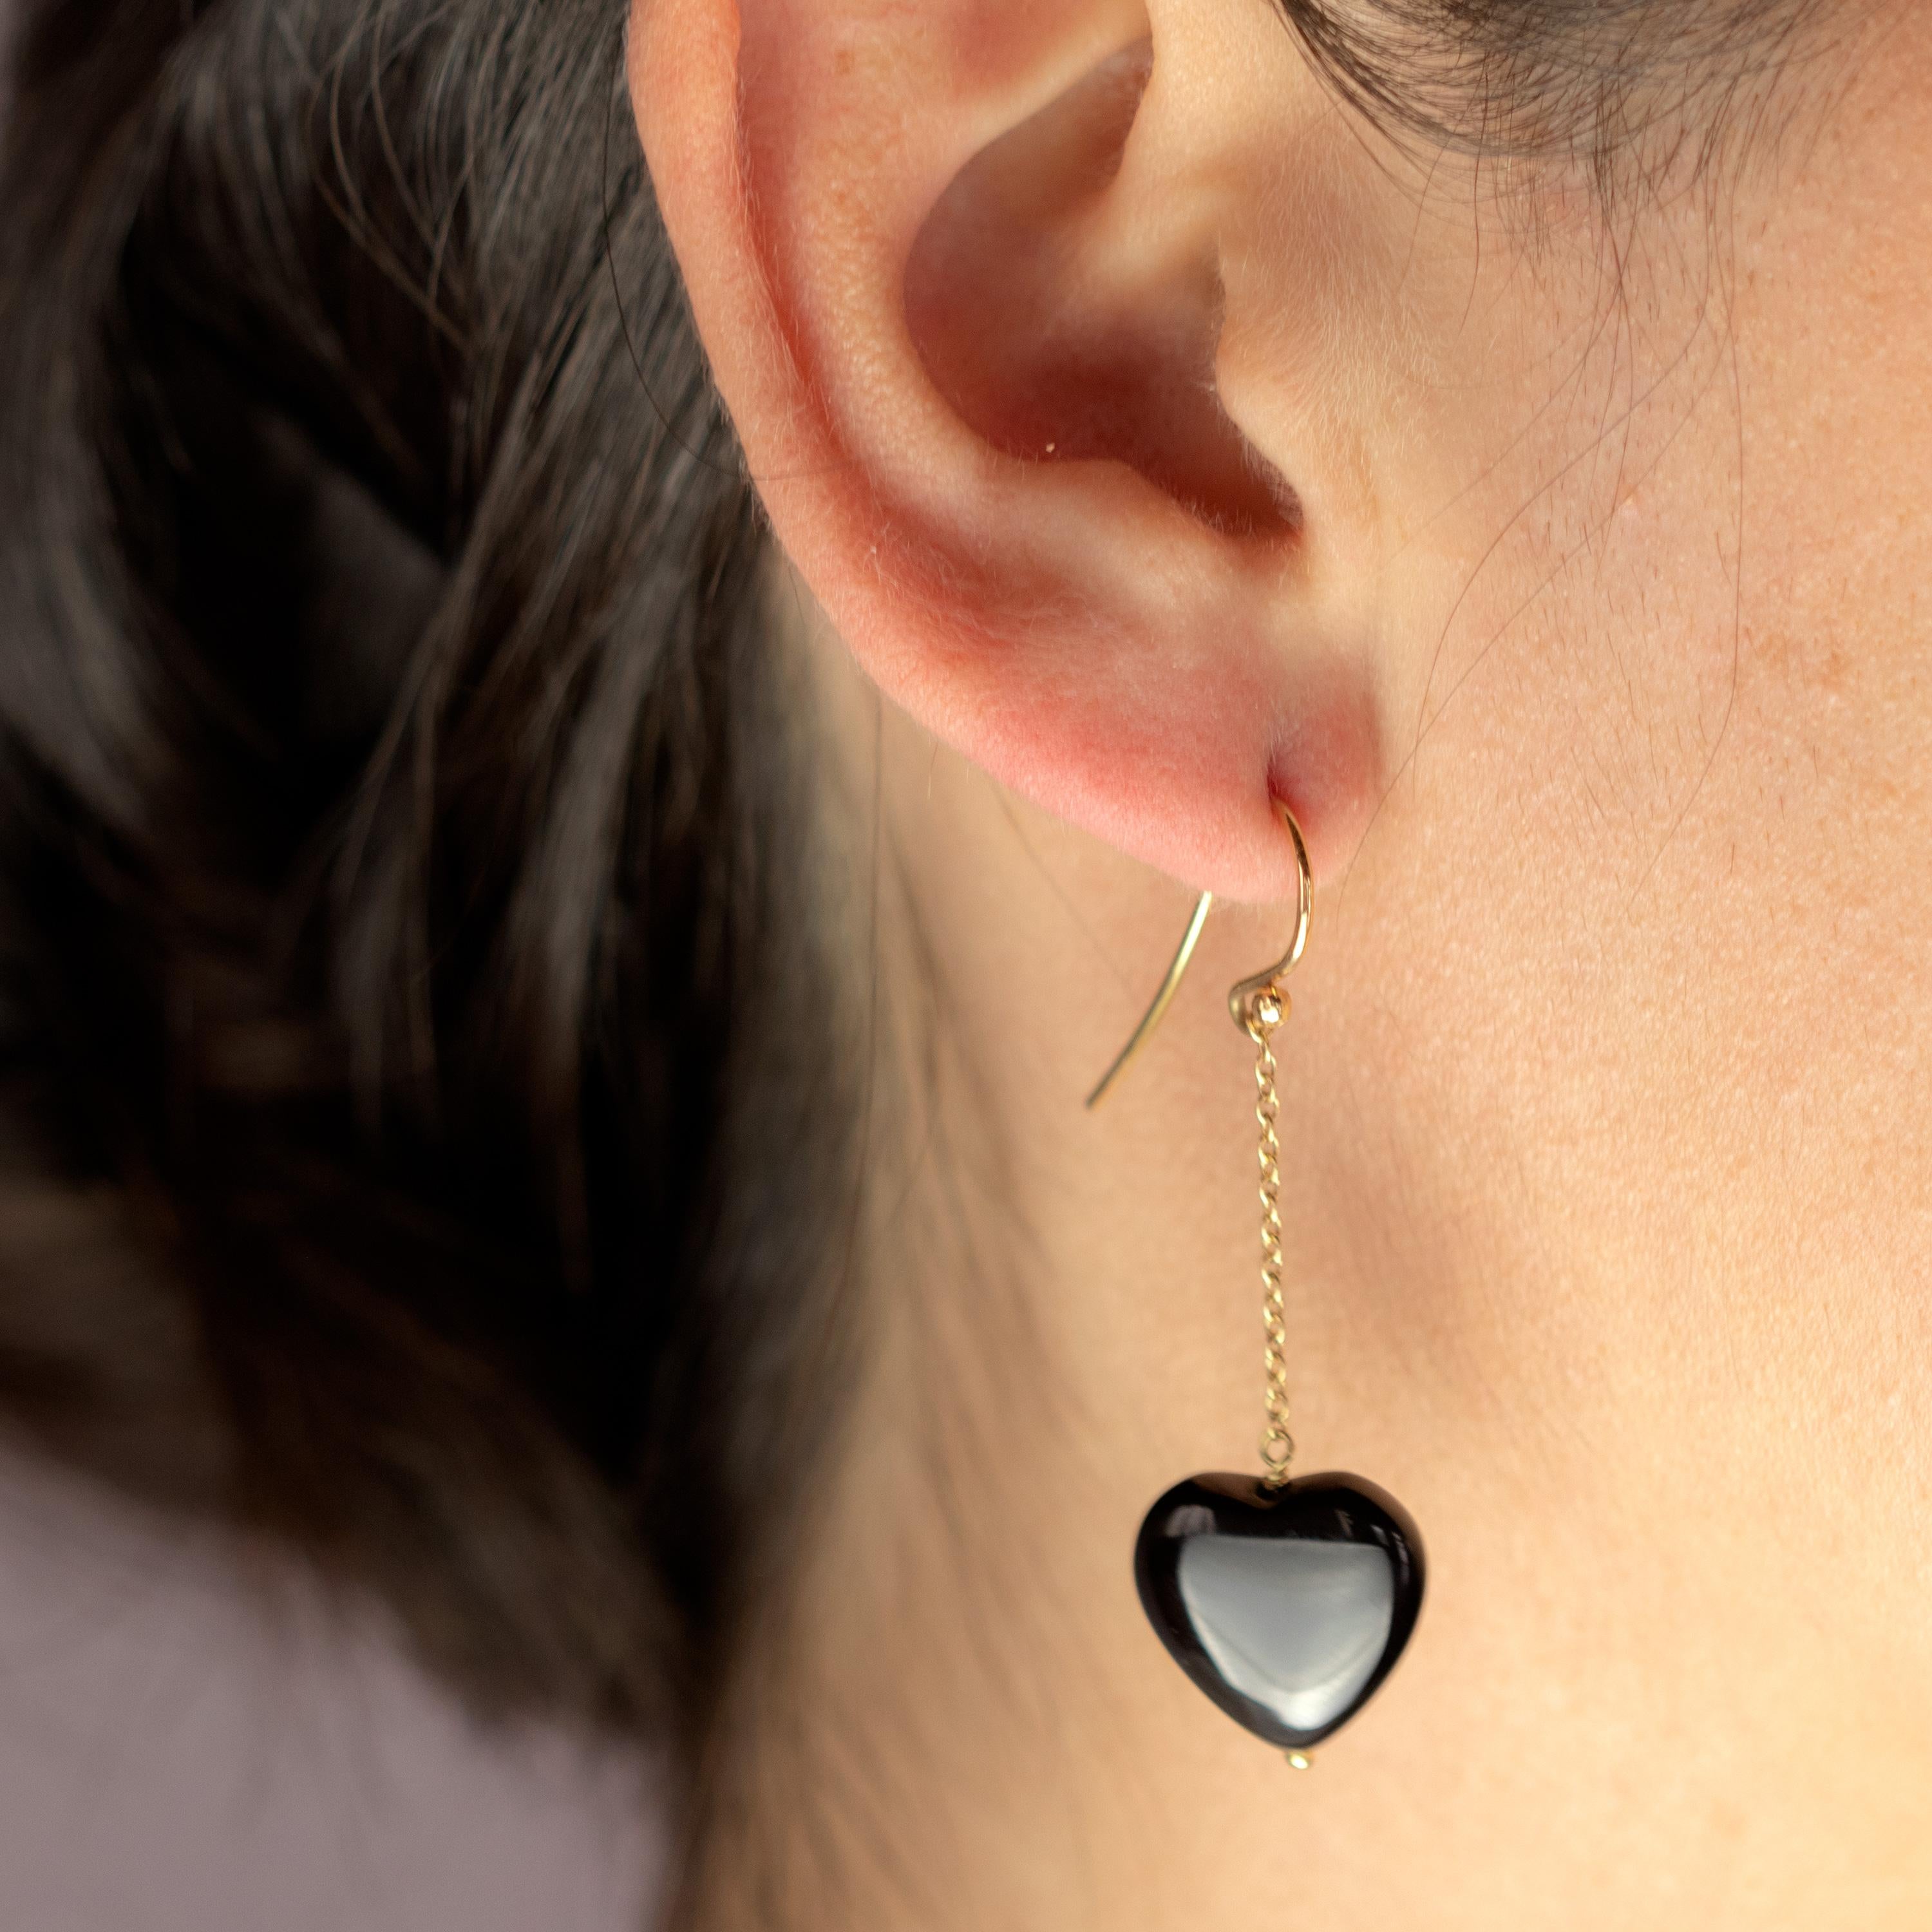 Breathtaking drop and chic black agate heart earwire earrings. 27.5 agate carat stone embellished with 18 karat yellow gold chain. Are you looking for a Valentine? These earrings will attract it.

Agate is an excellent stone for rebalancing and